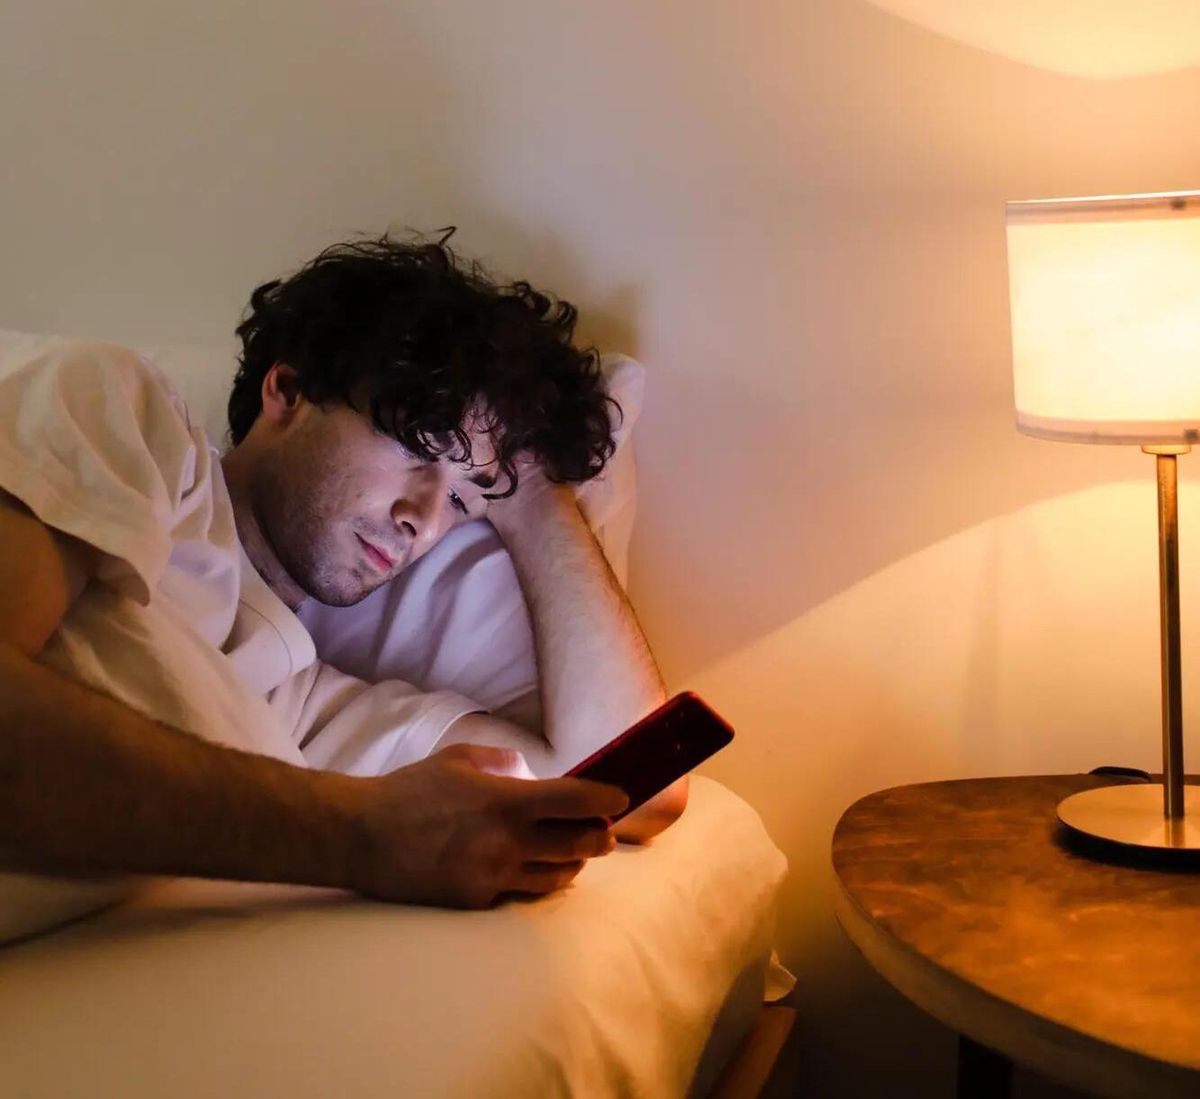 Staying for hours on a screen before going to sleep can seriously hamper the quality of sleep and make you always feel tired when you wake up.